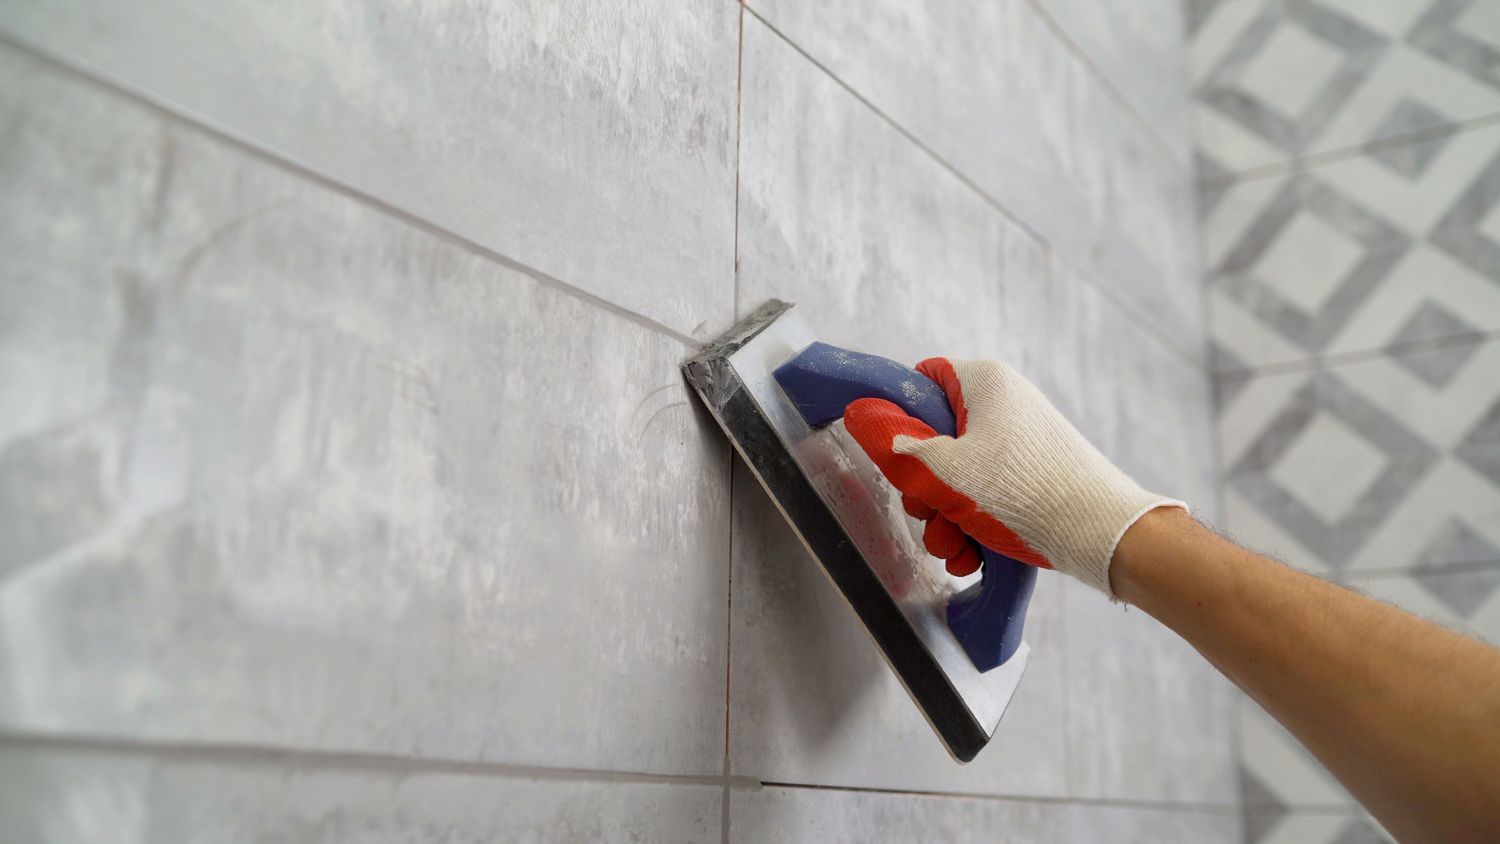 How Do You Remove Grout?